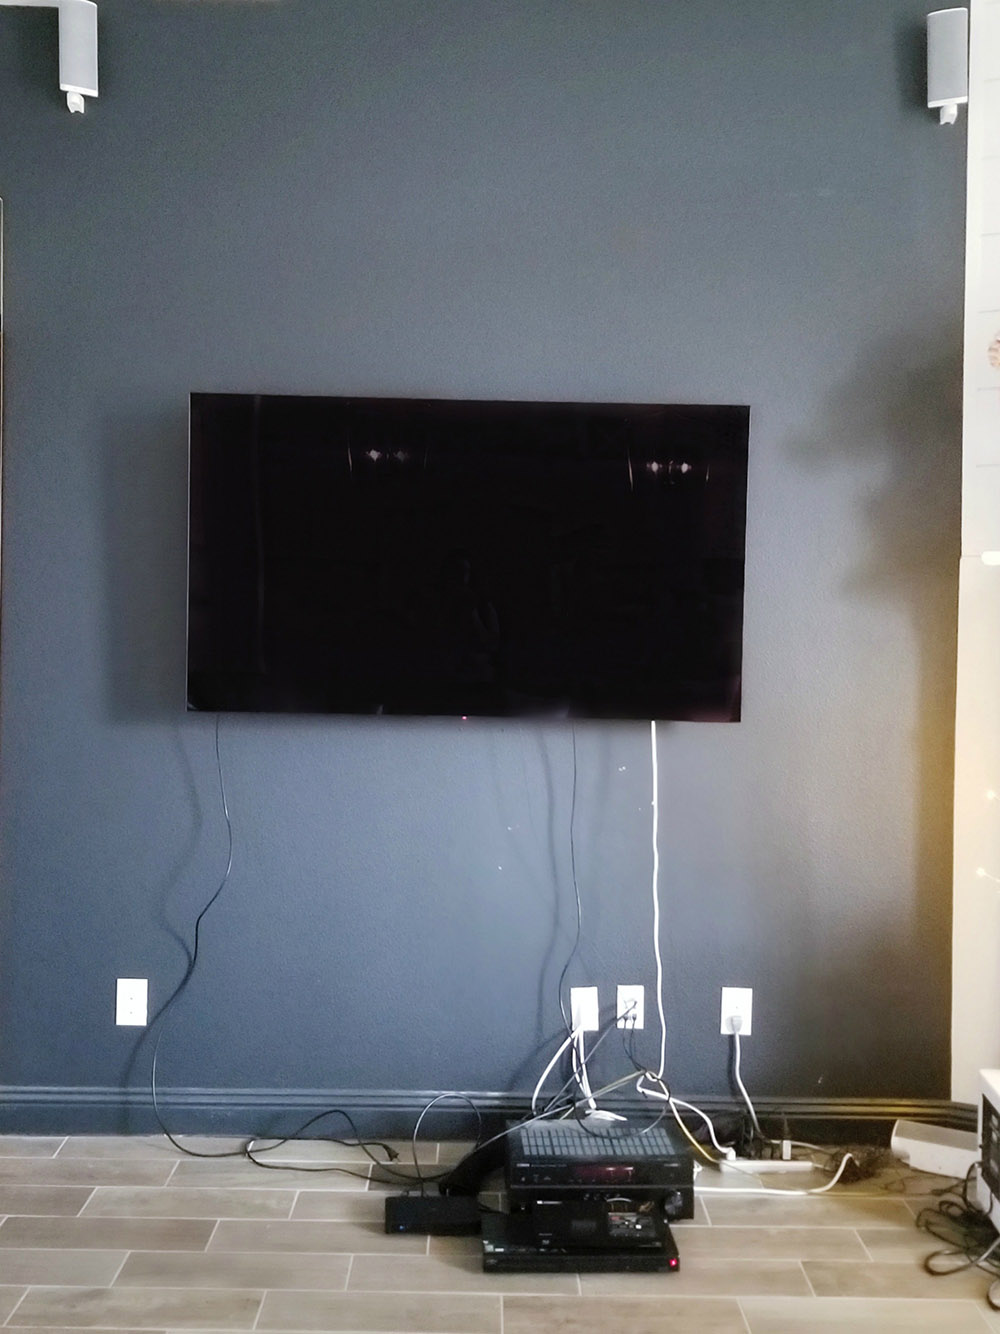 A flatscreen TV mounted on a dark wall with cords hanging down the wall.